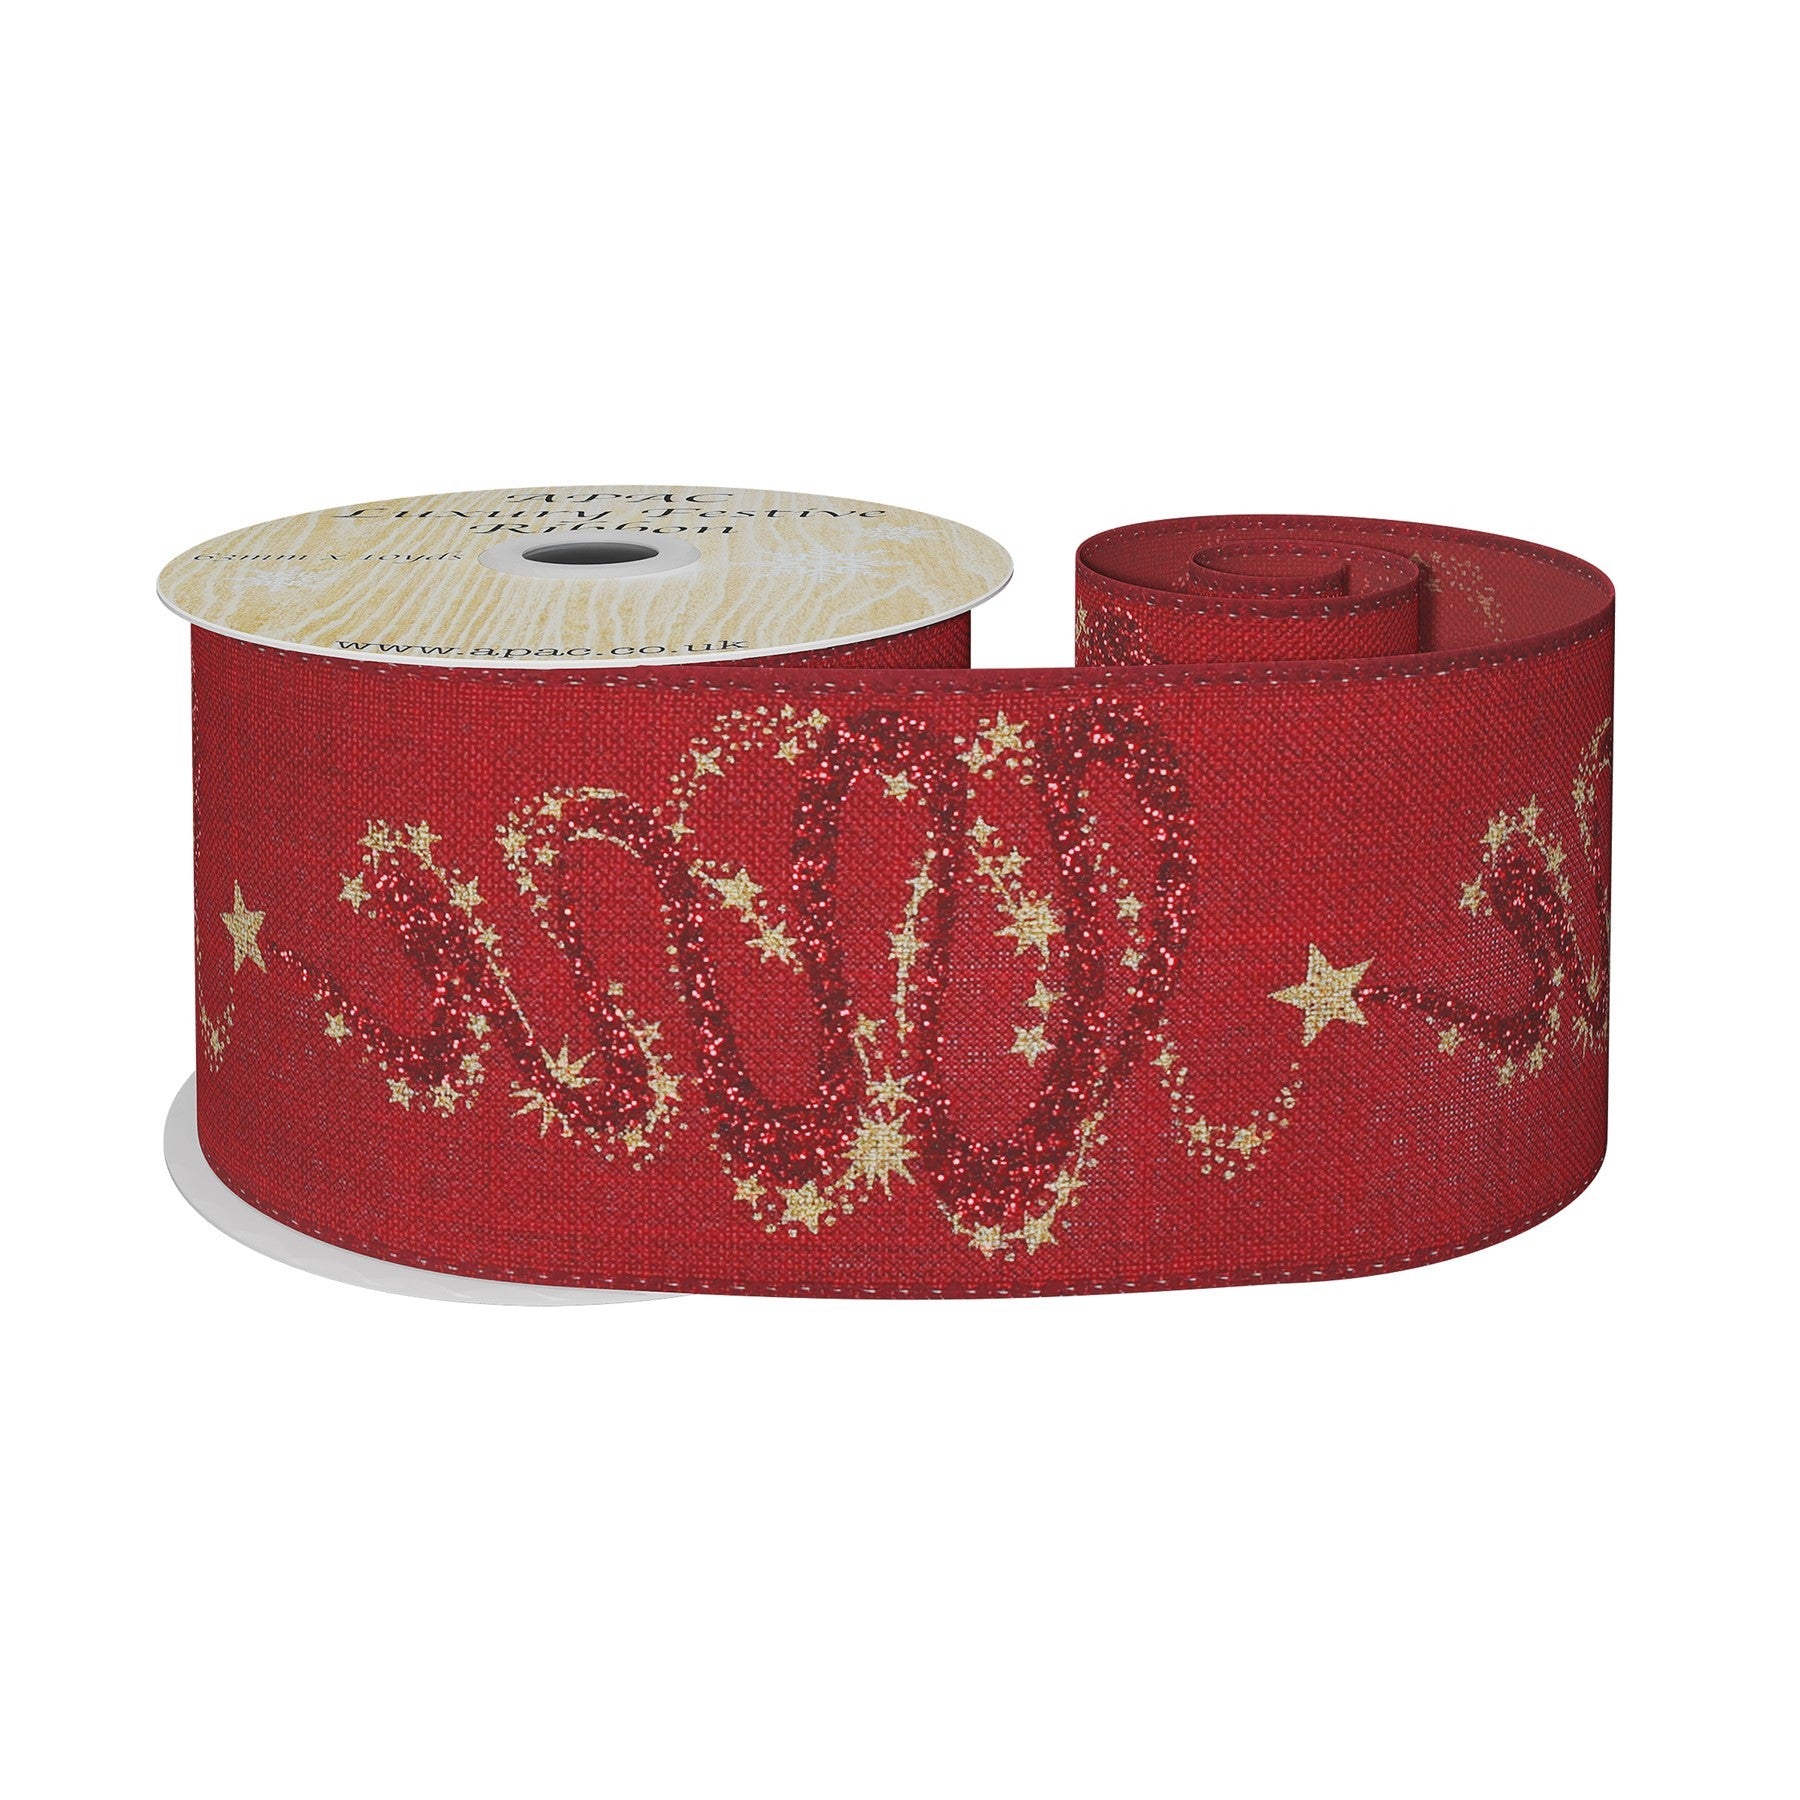 View Burgundy Ribbon with Christmas Star and swirl Design 63mm x 10yd information